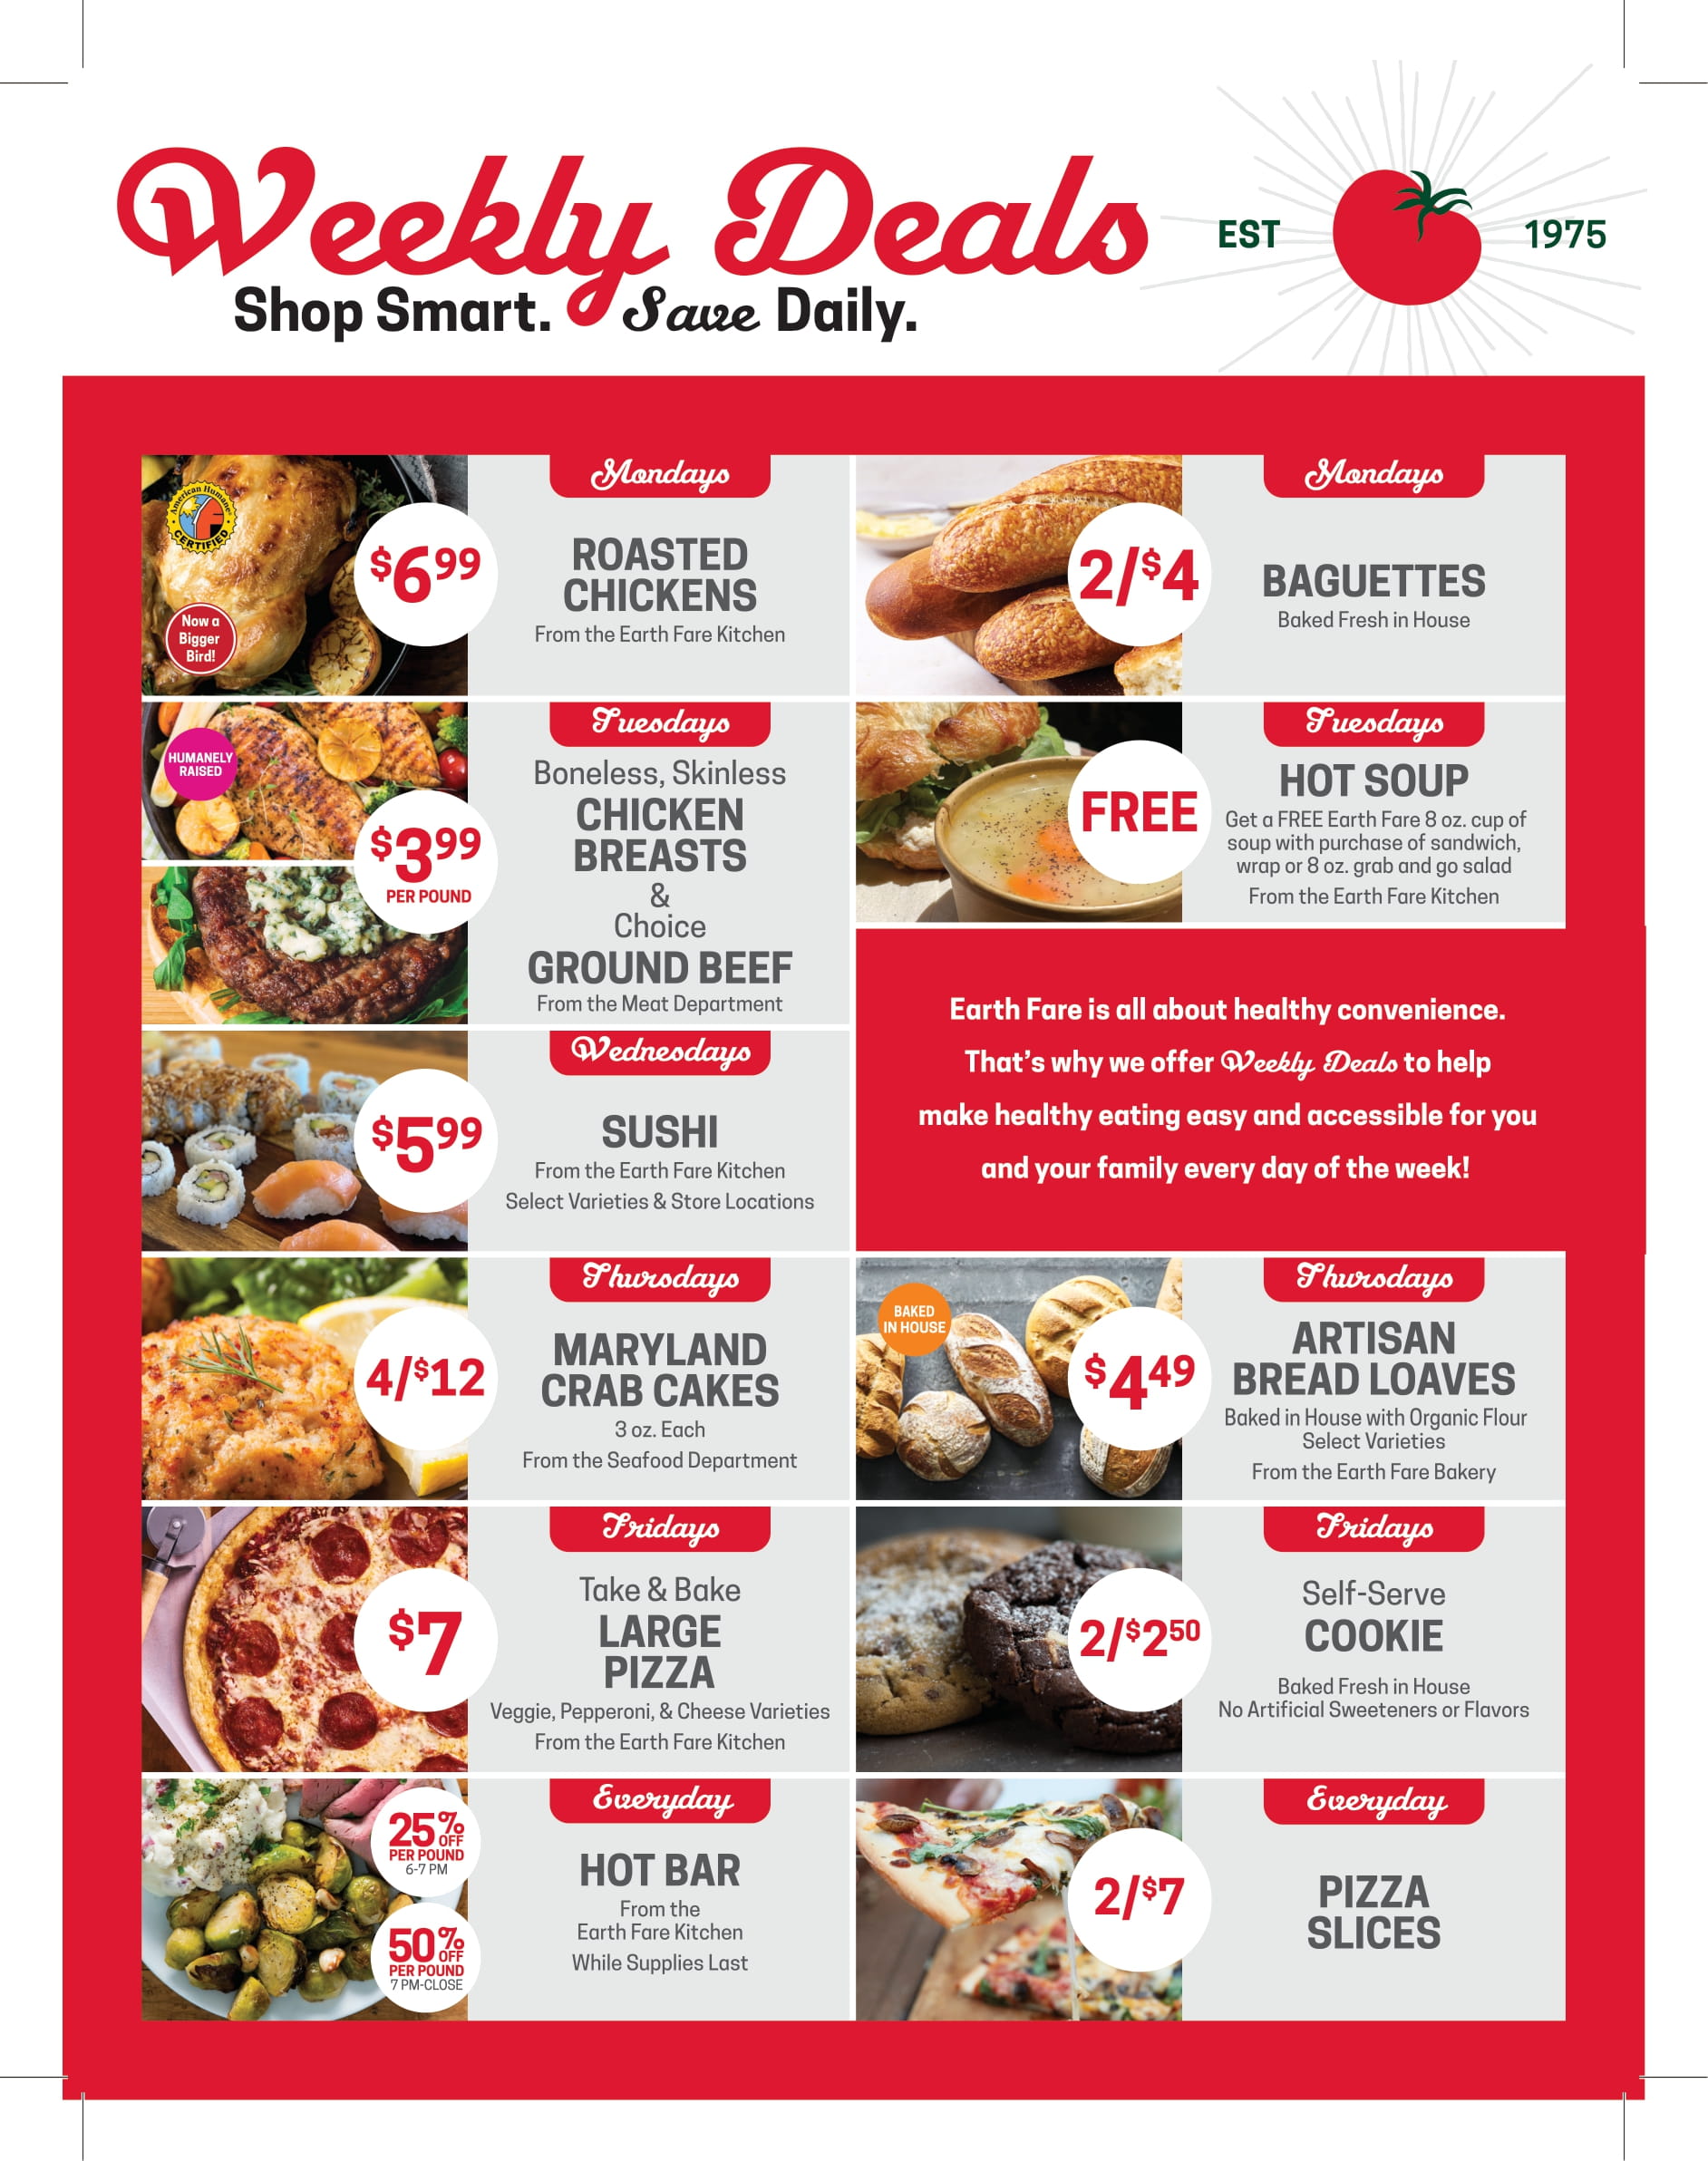 This week, purchase Fruit & Nut - Daily Deals Food Outlet